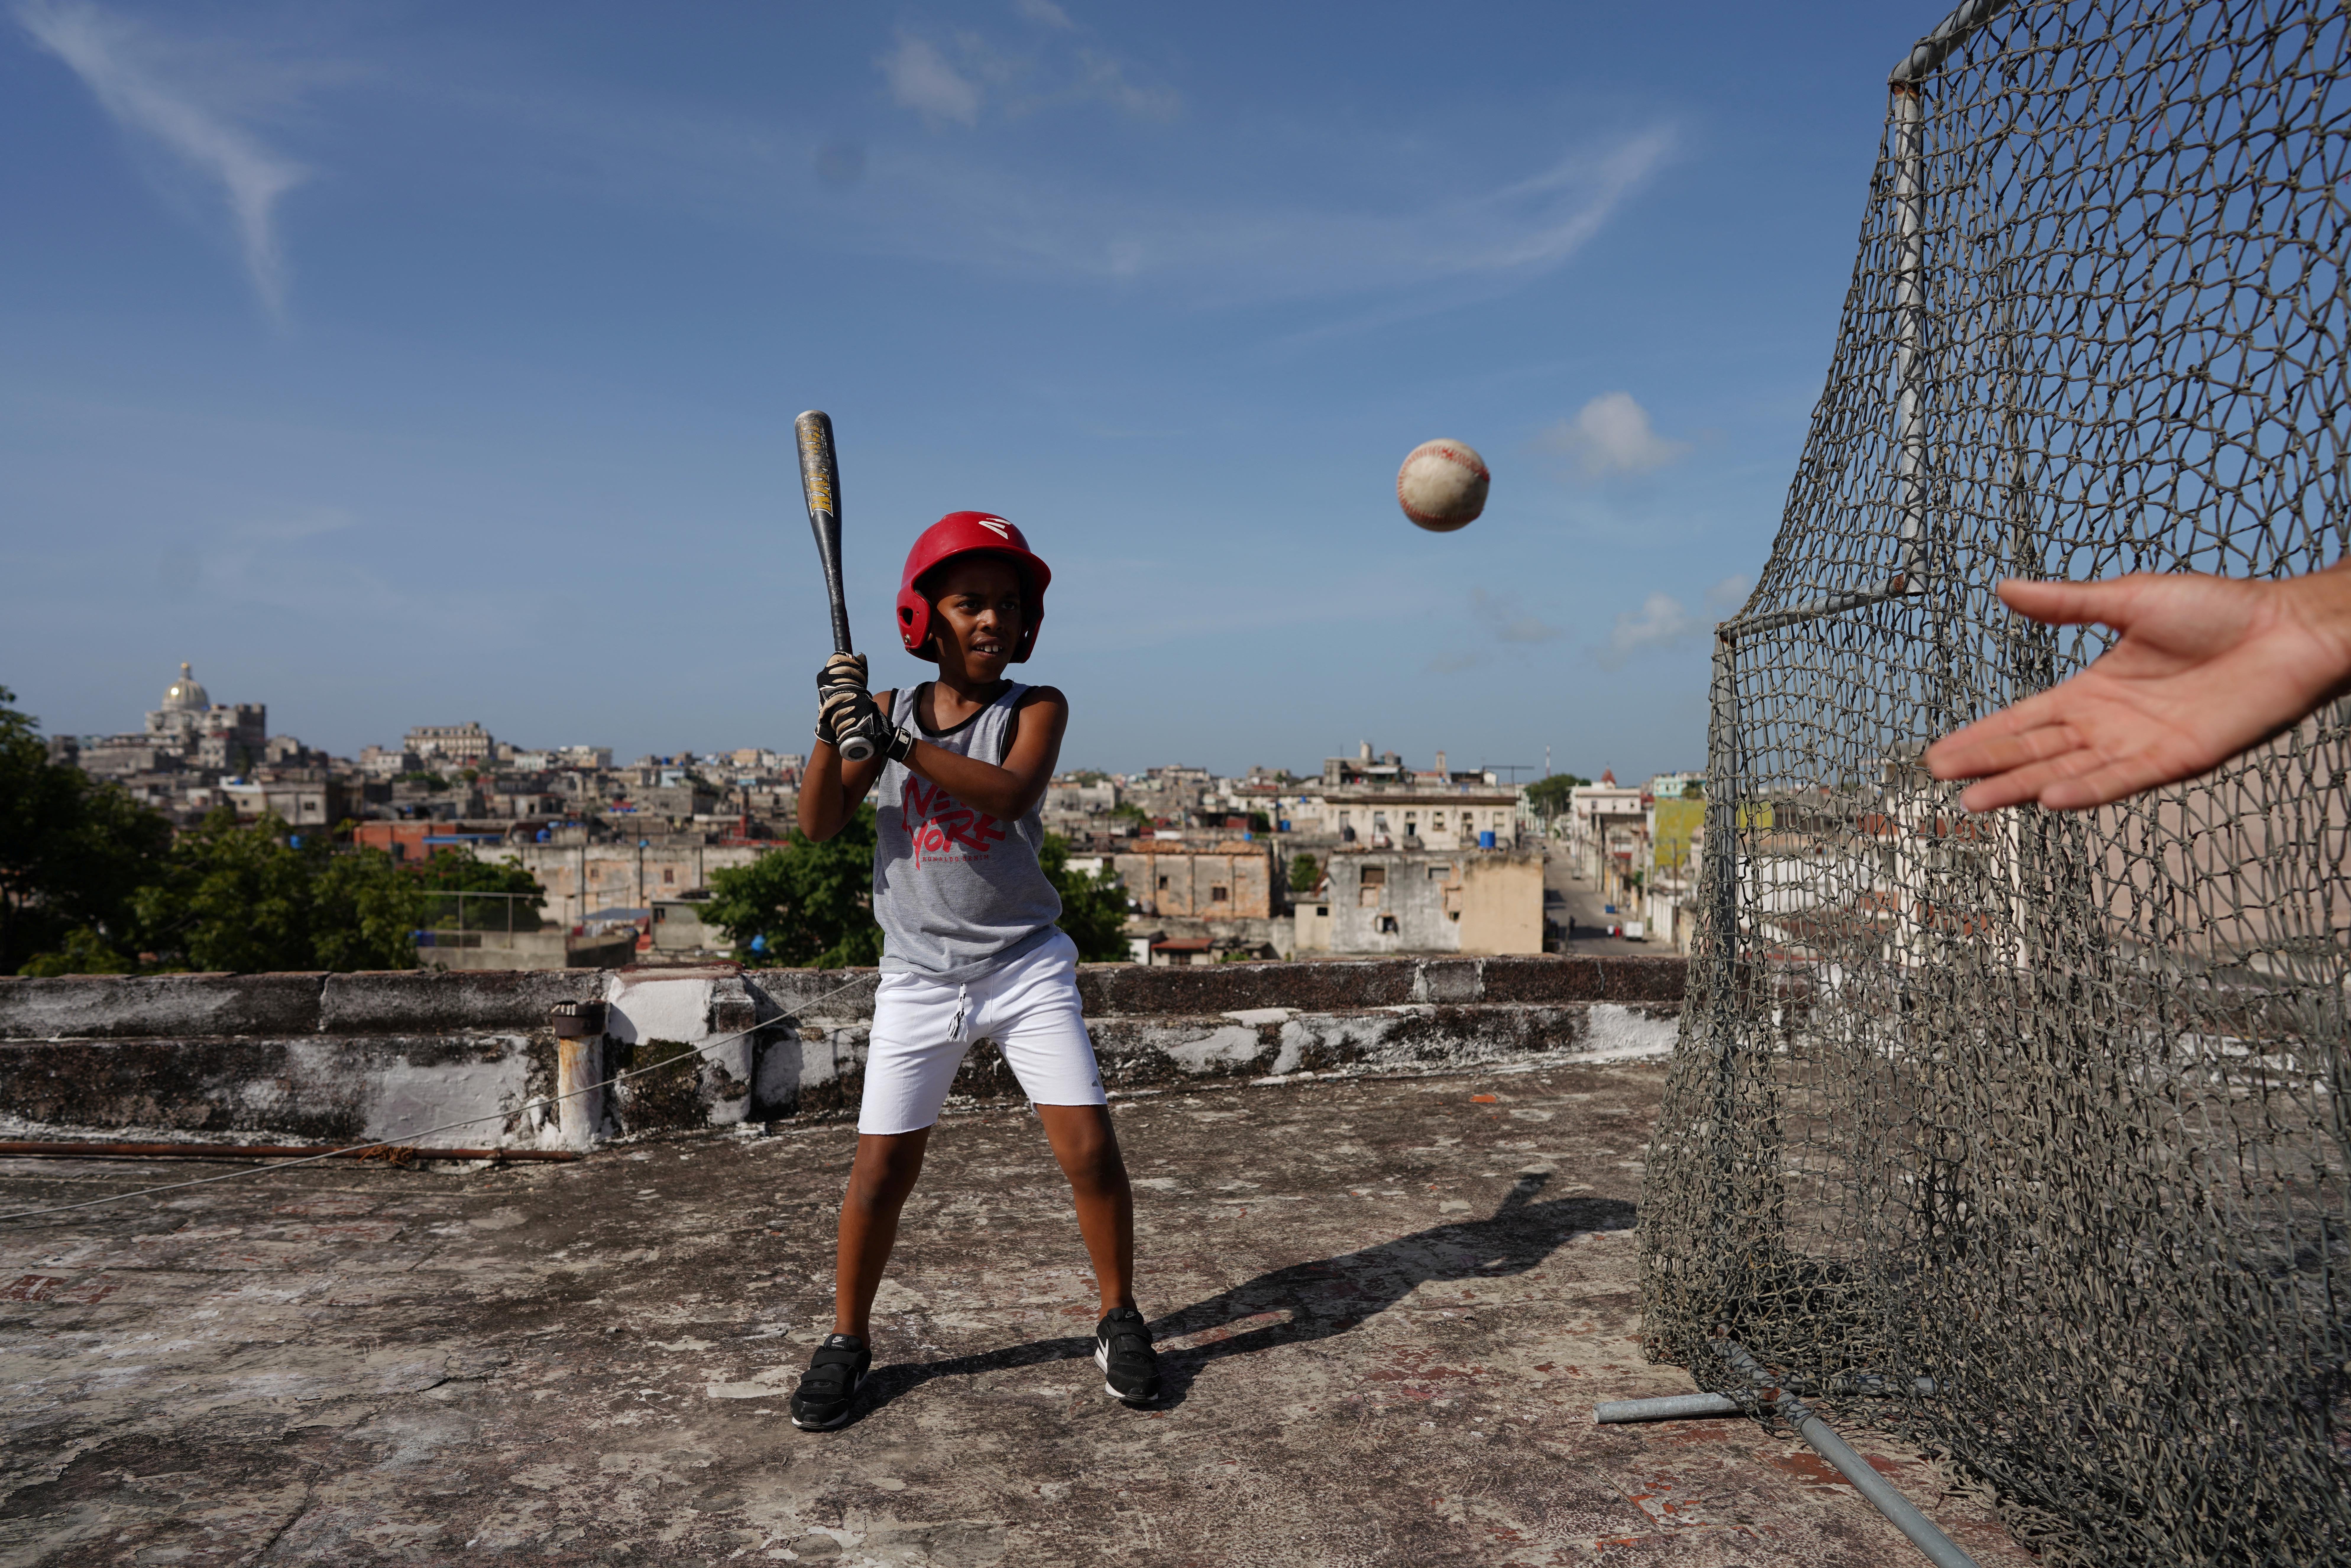 Baseball fan Kevin Kindelan, eight, practises with his father on the roof of their house in Havana